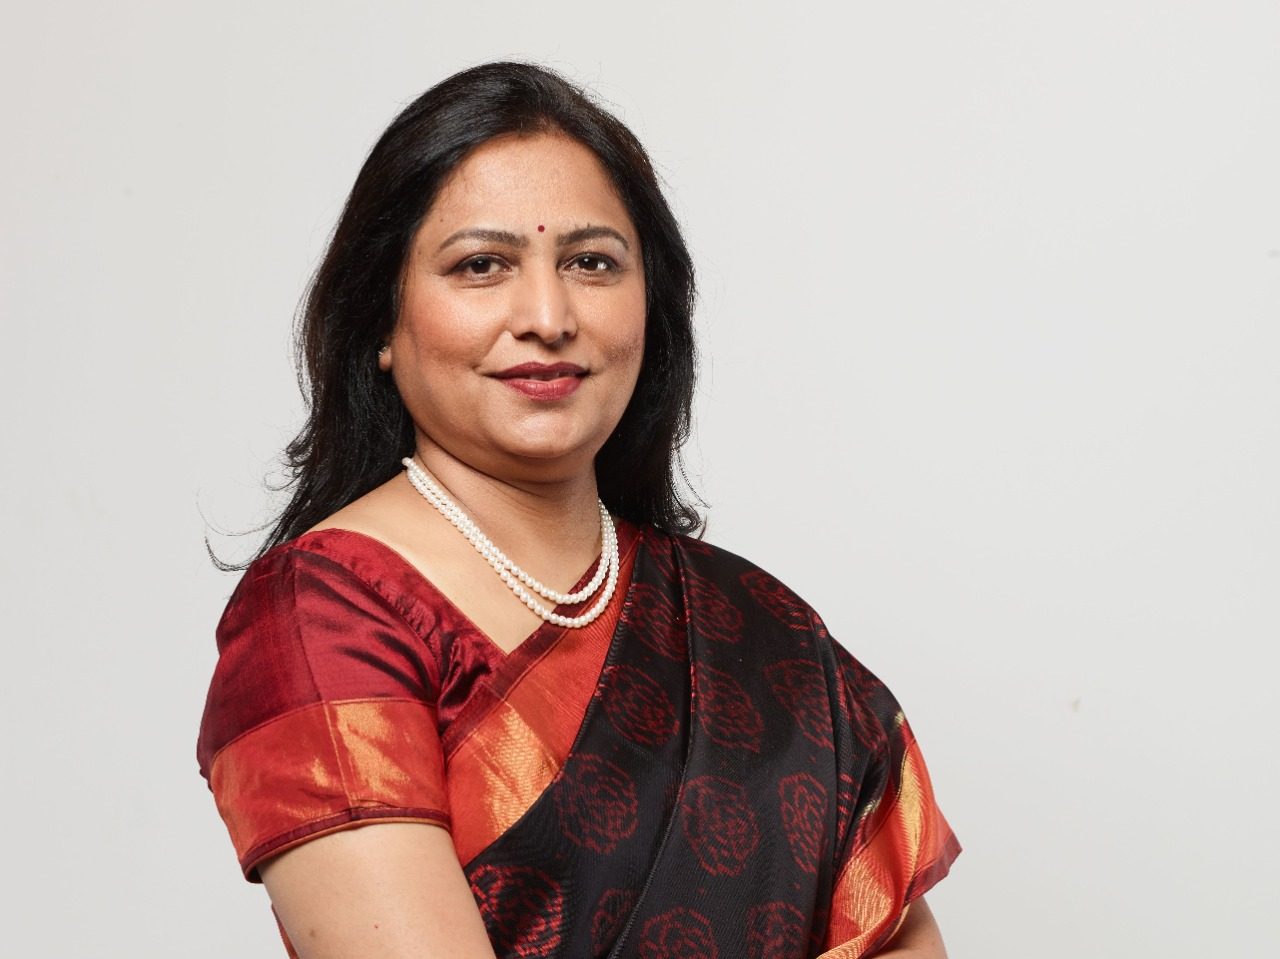 Priti Adani, the wife of Asia’s richest man Gautam Adani, and chairperson of the Indian tycoon family’s Adani Foundation. Photo: Handout